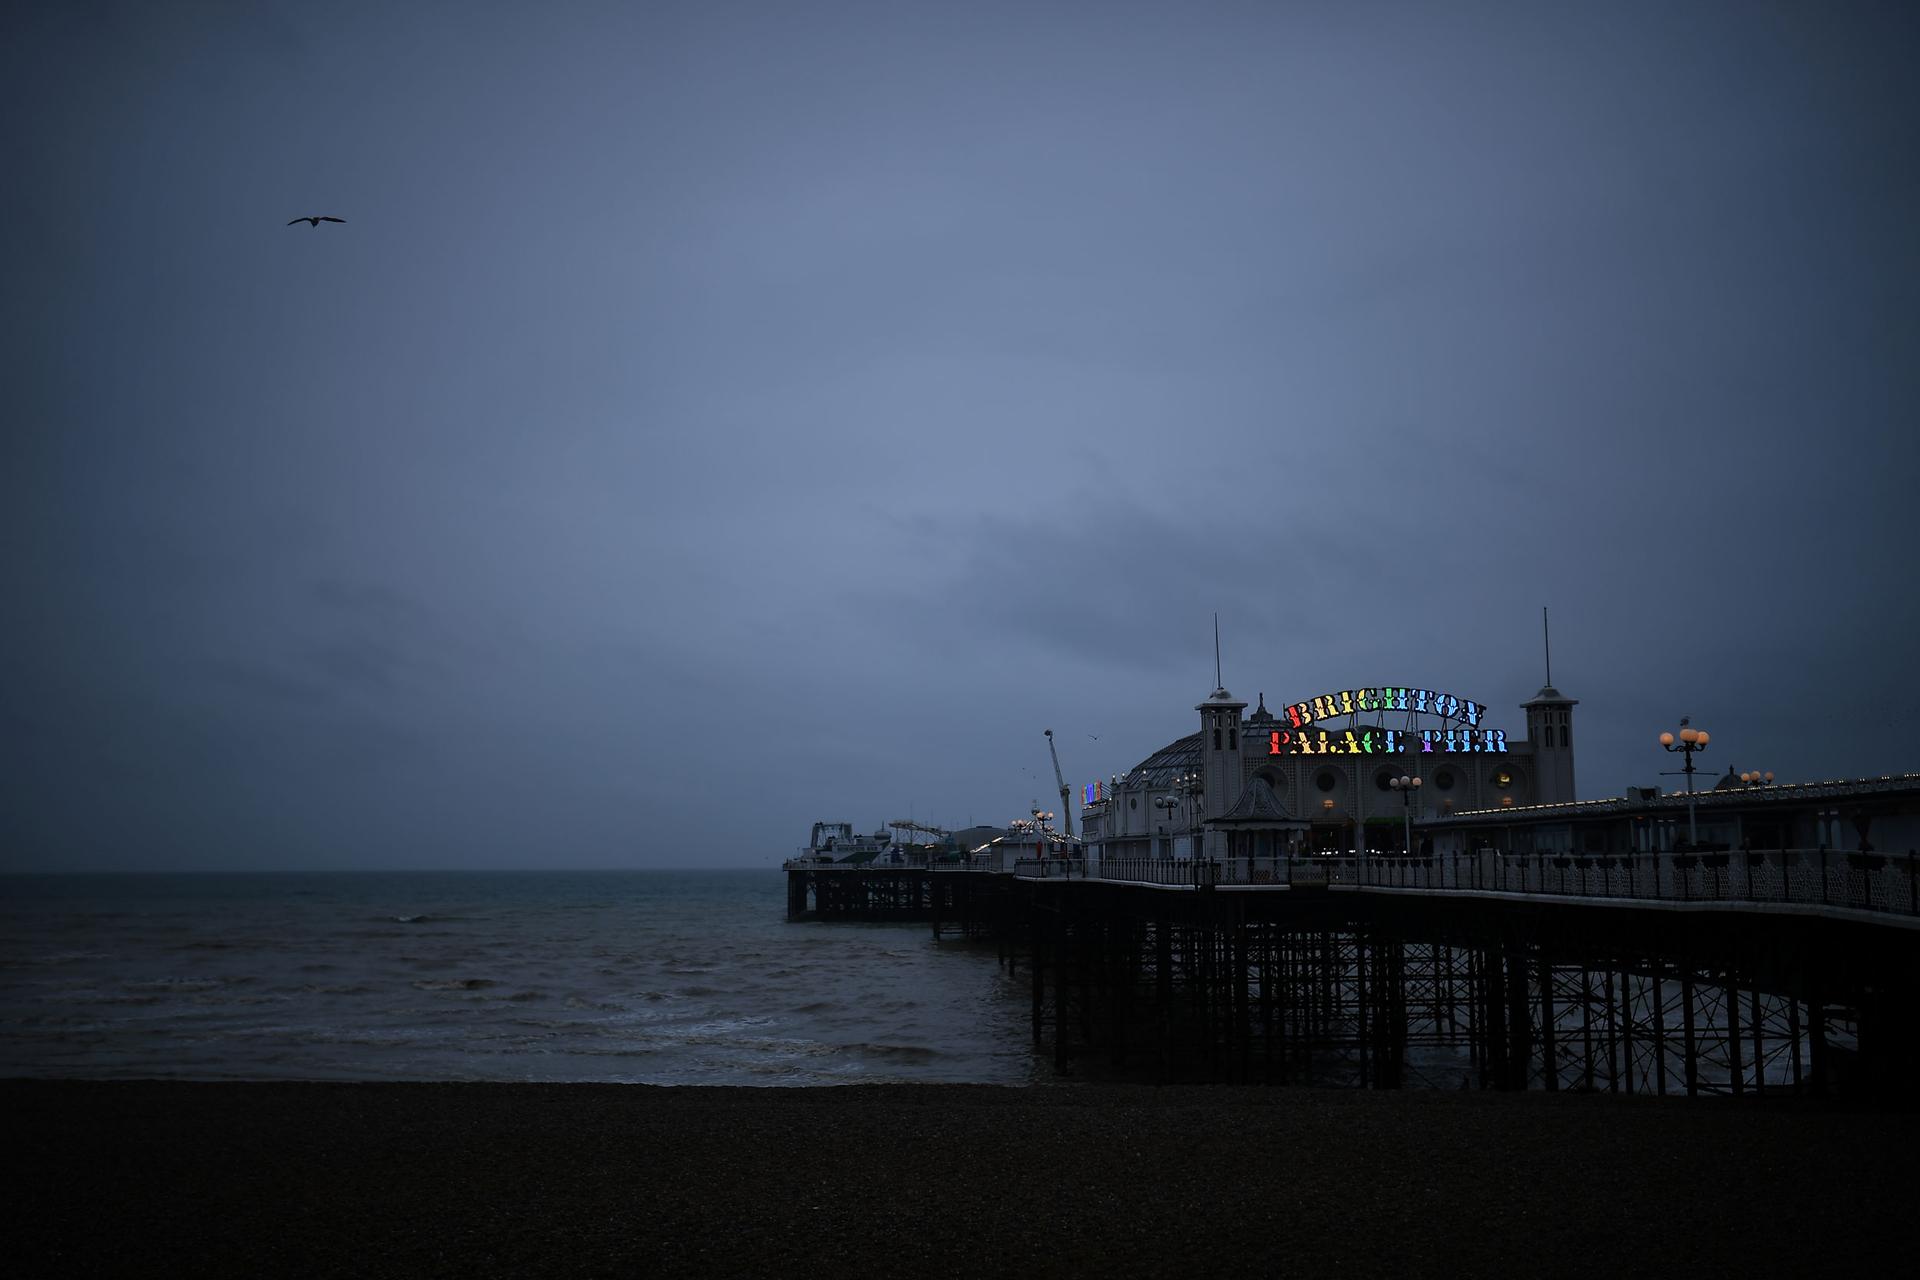 A large building is shown at the end of a pier with a sign illuminated with rainbow colors.